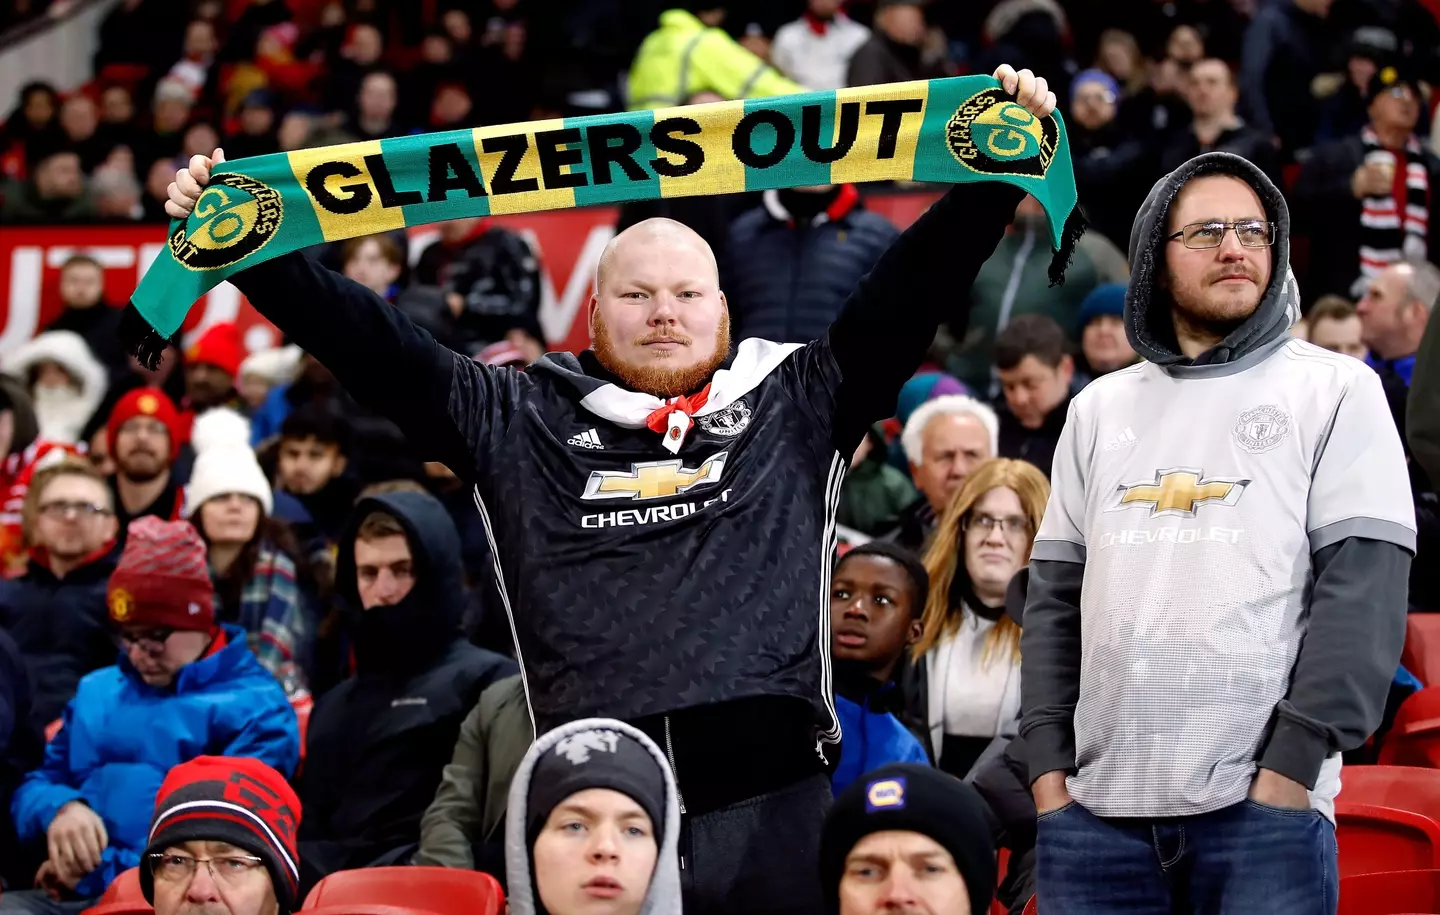 The Glazers have faced protests from fans over their ownership of the club (Image: Alamy)